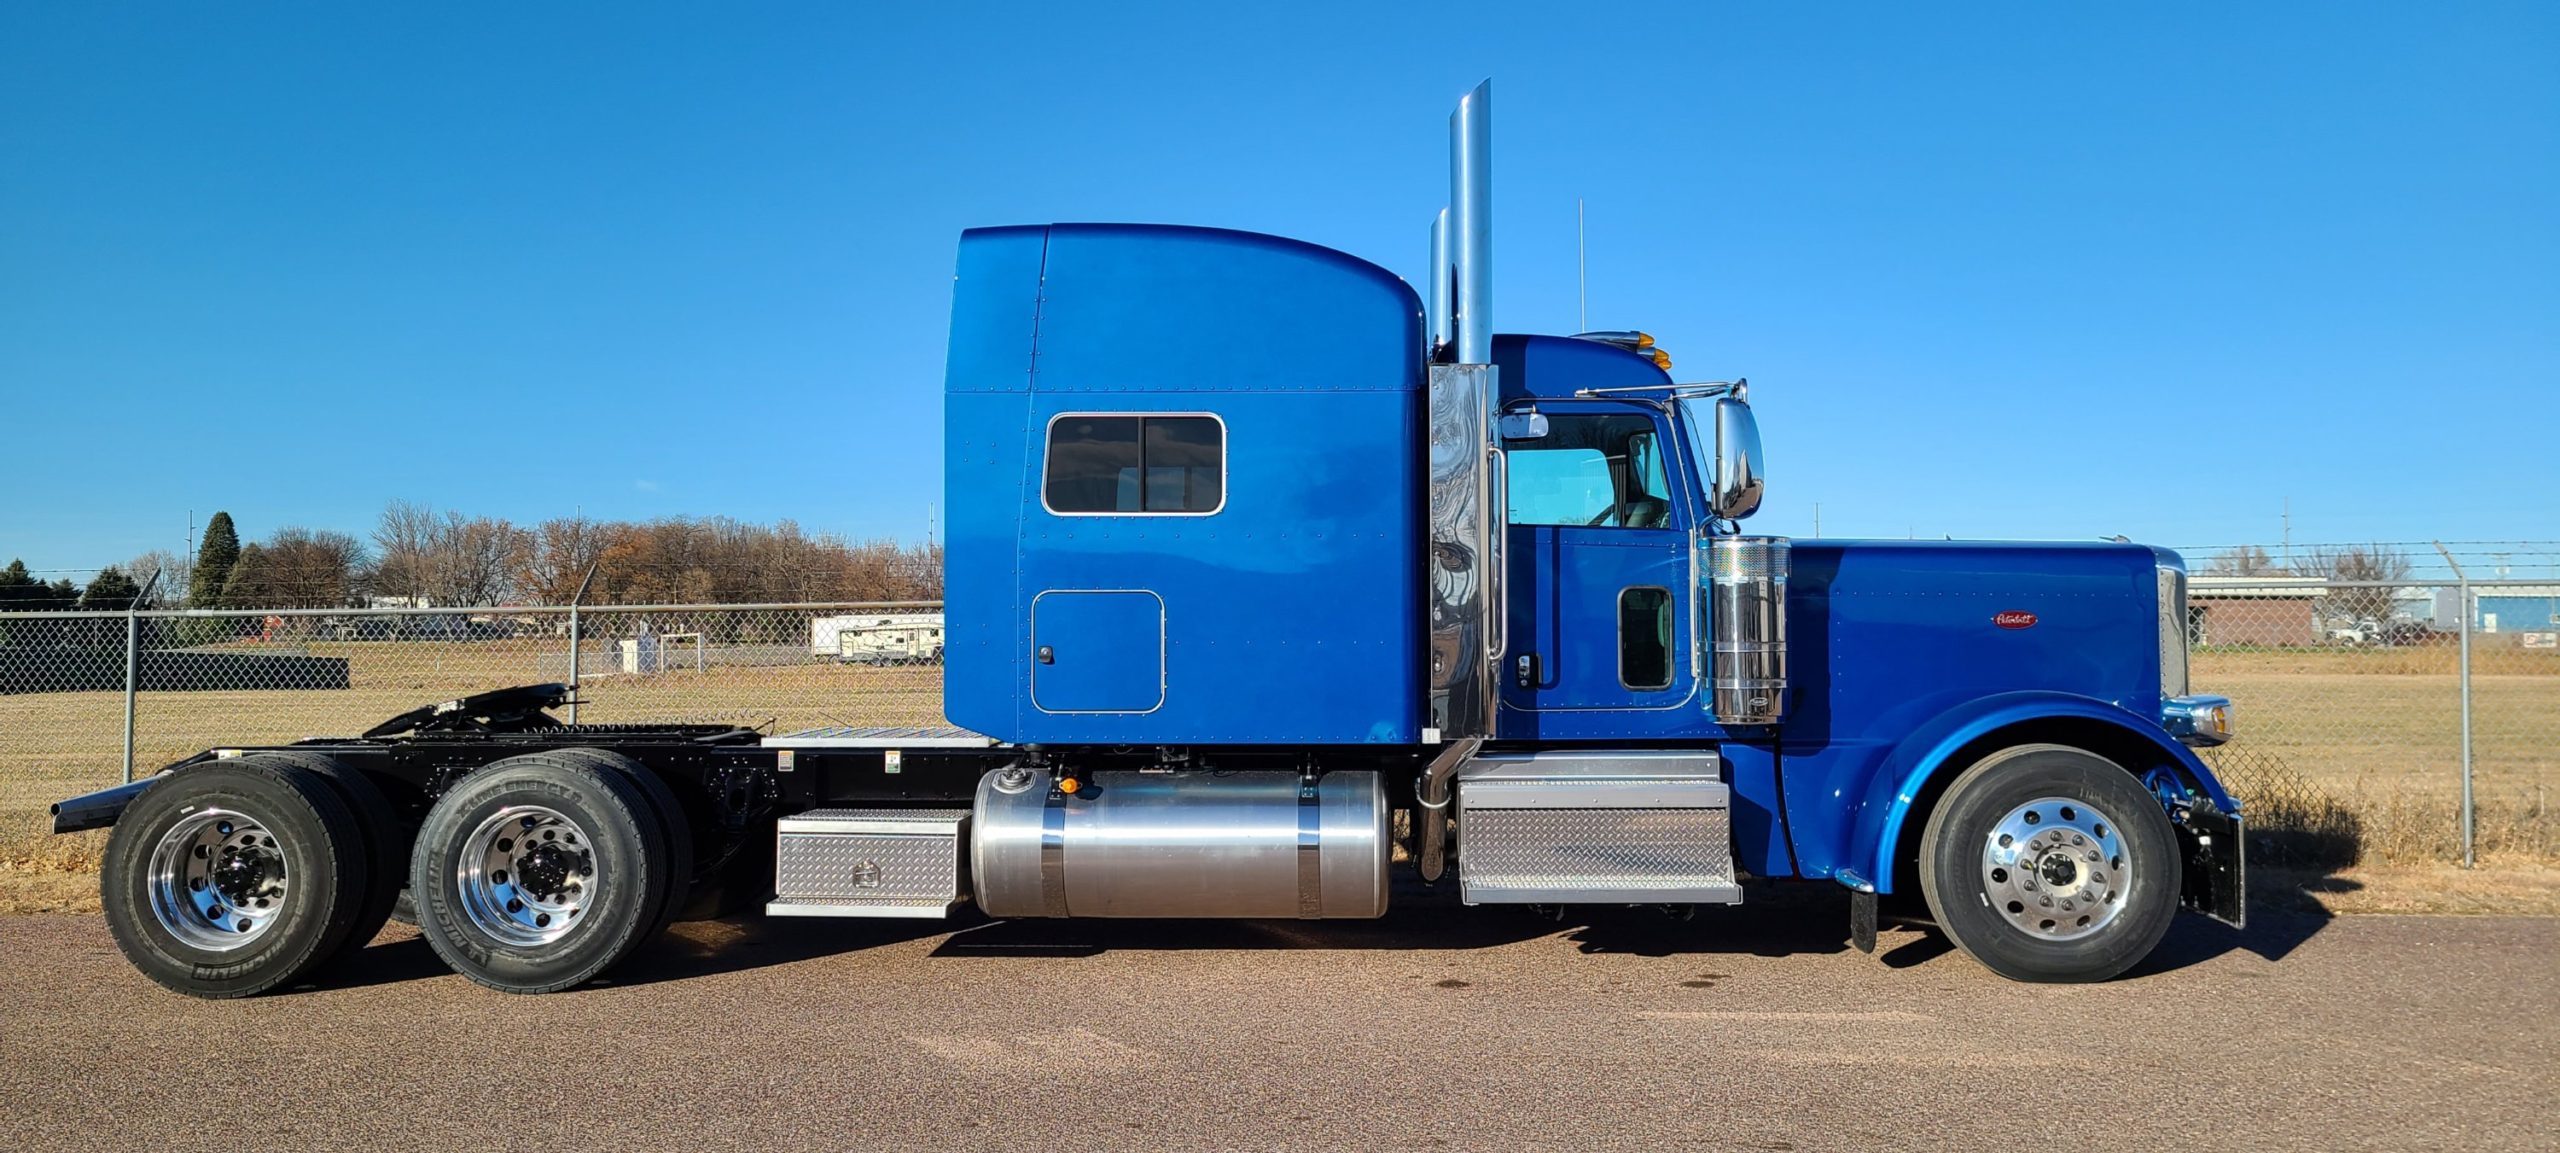 SOVEREIGN BLUE NEW STAND UP JUST IN TODAY! - Peterbilt of Sioux Falls